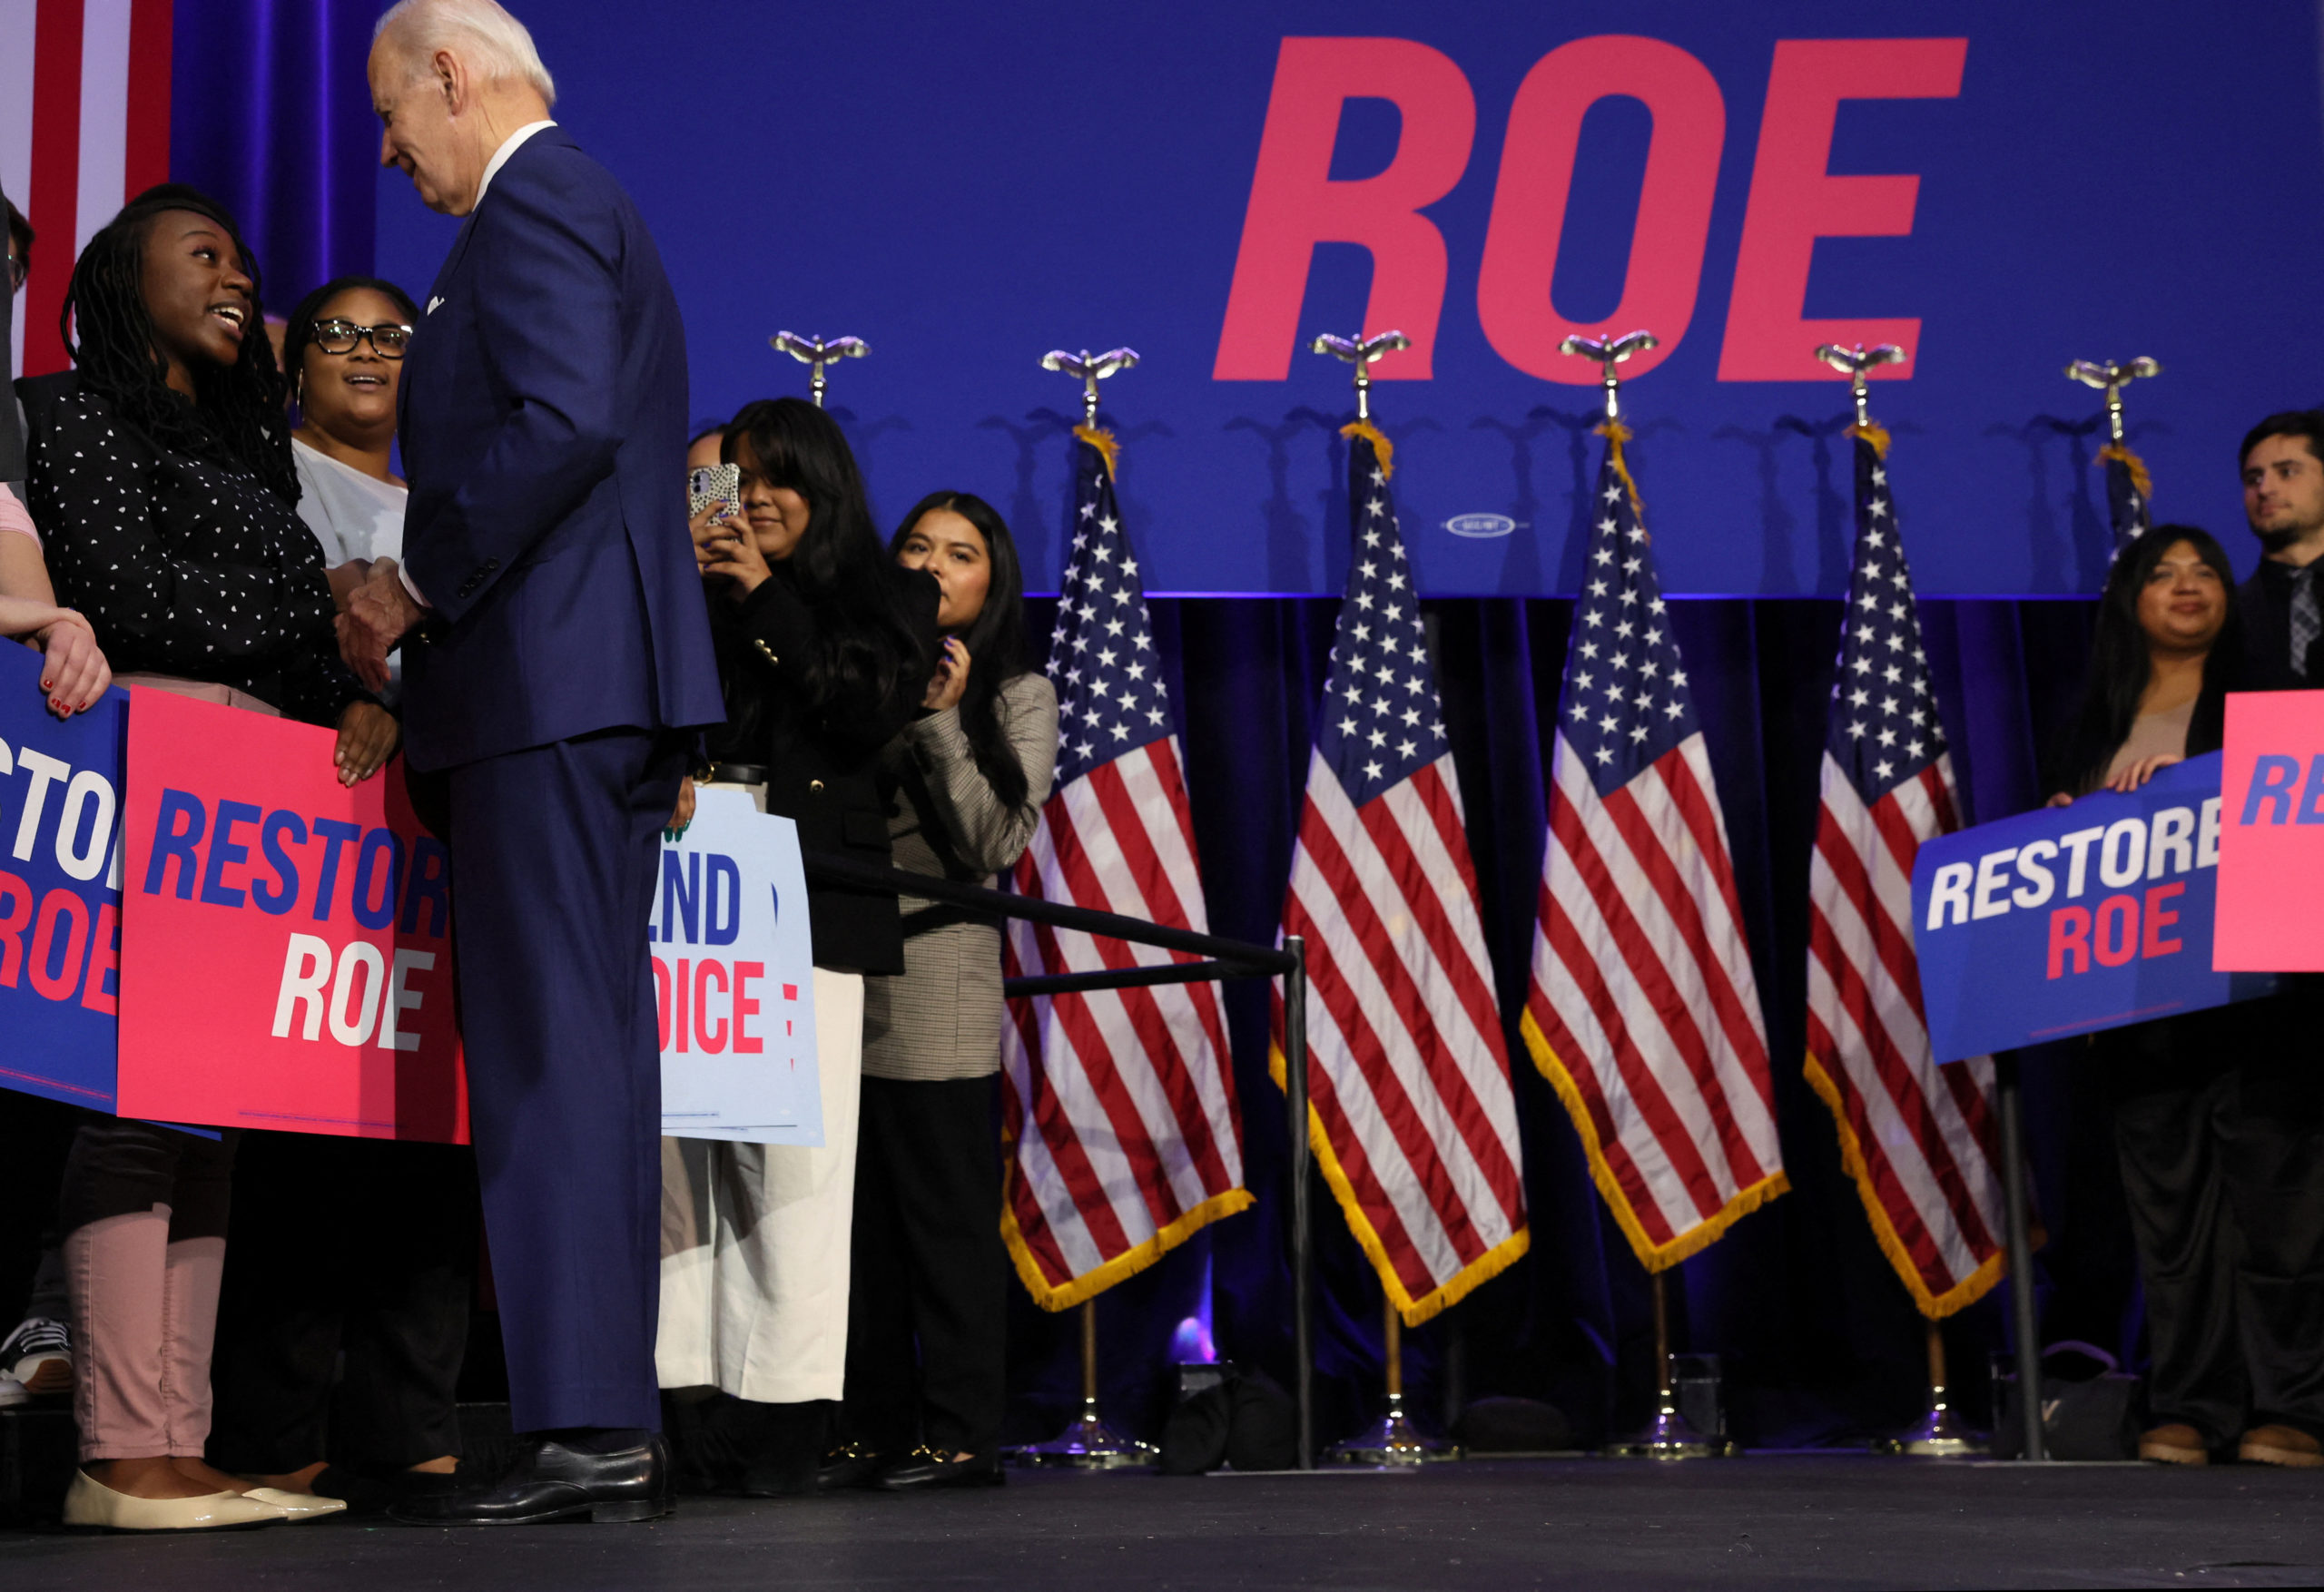 U.S. President Joe Biden greets people who stood on the stage behind him as he delivered remarks on abortion rights in a speech hosted by the Democratic National Committee (DNC) at the Howard Theatre in Washington, U.S., October 18, 2022. REUTERS/Leah Millis